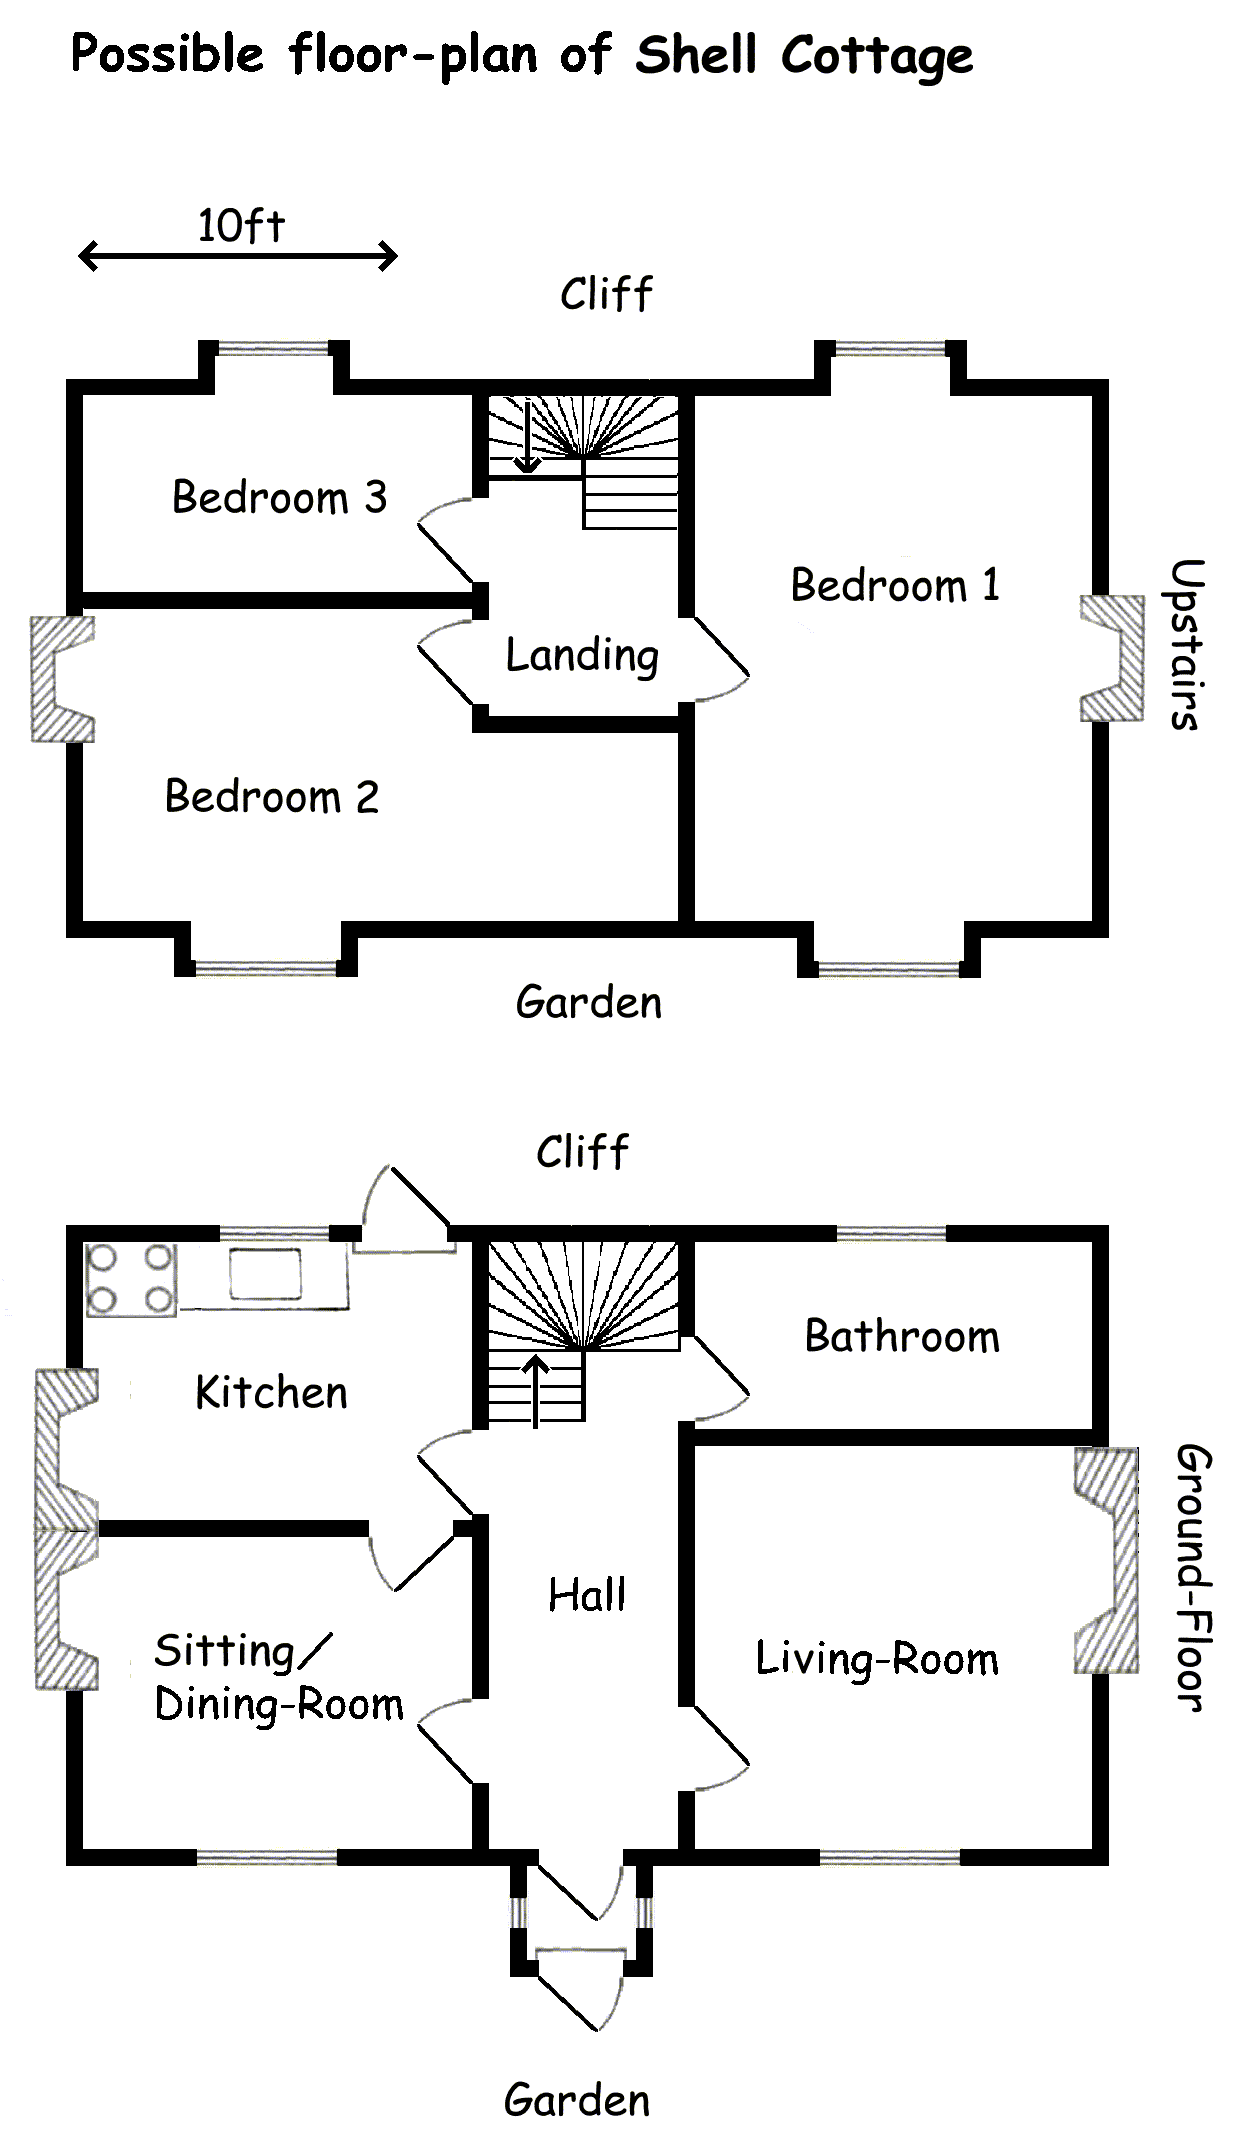 possible floor-plan of shell Cottage